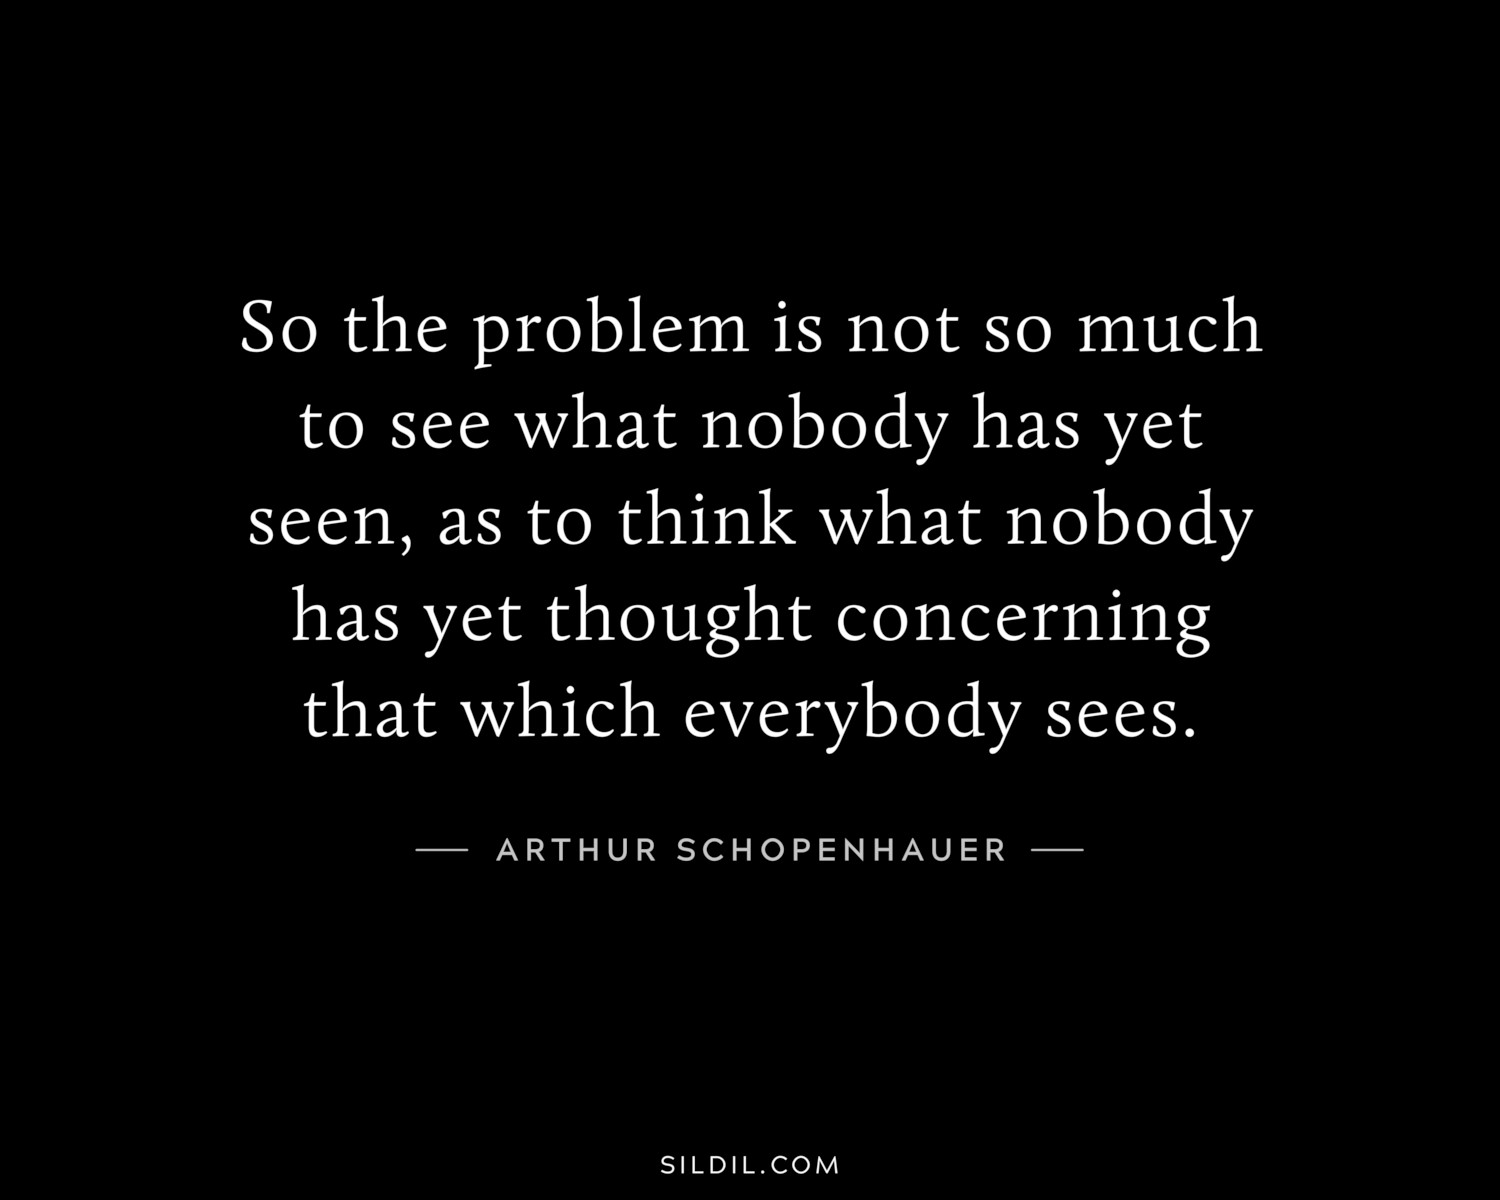 So the problem is not so much to see what nobody has yet seen, as to think what nobody has yet thought concerning that which everybody sees.